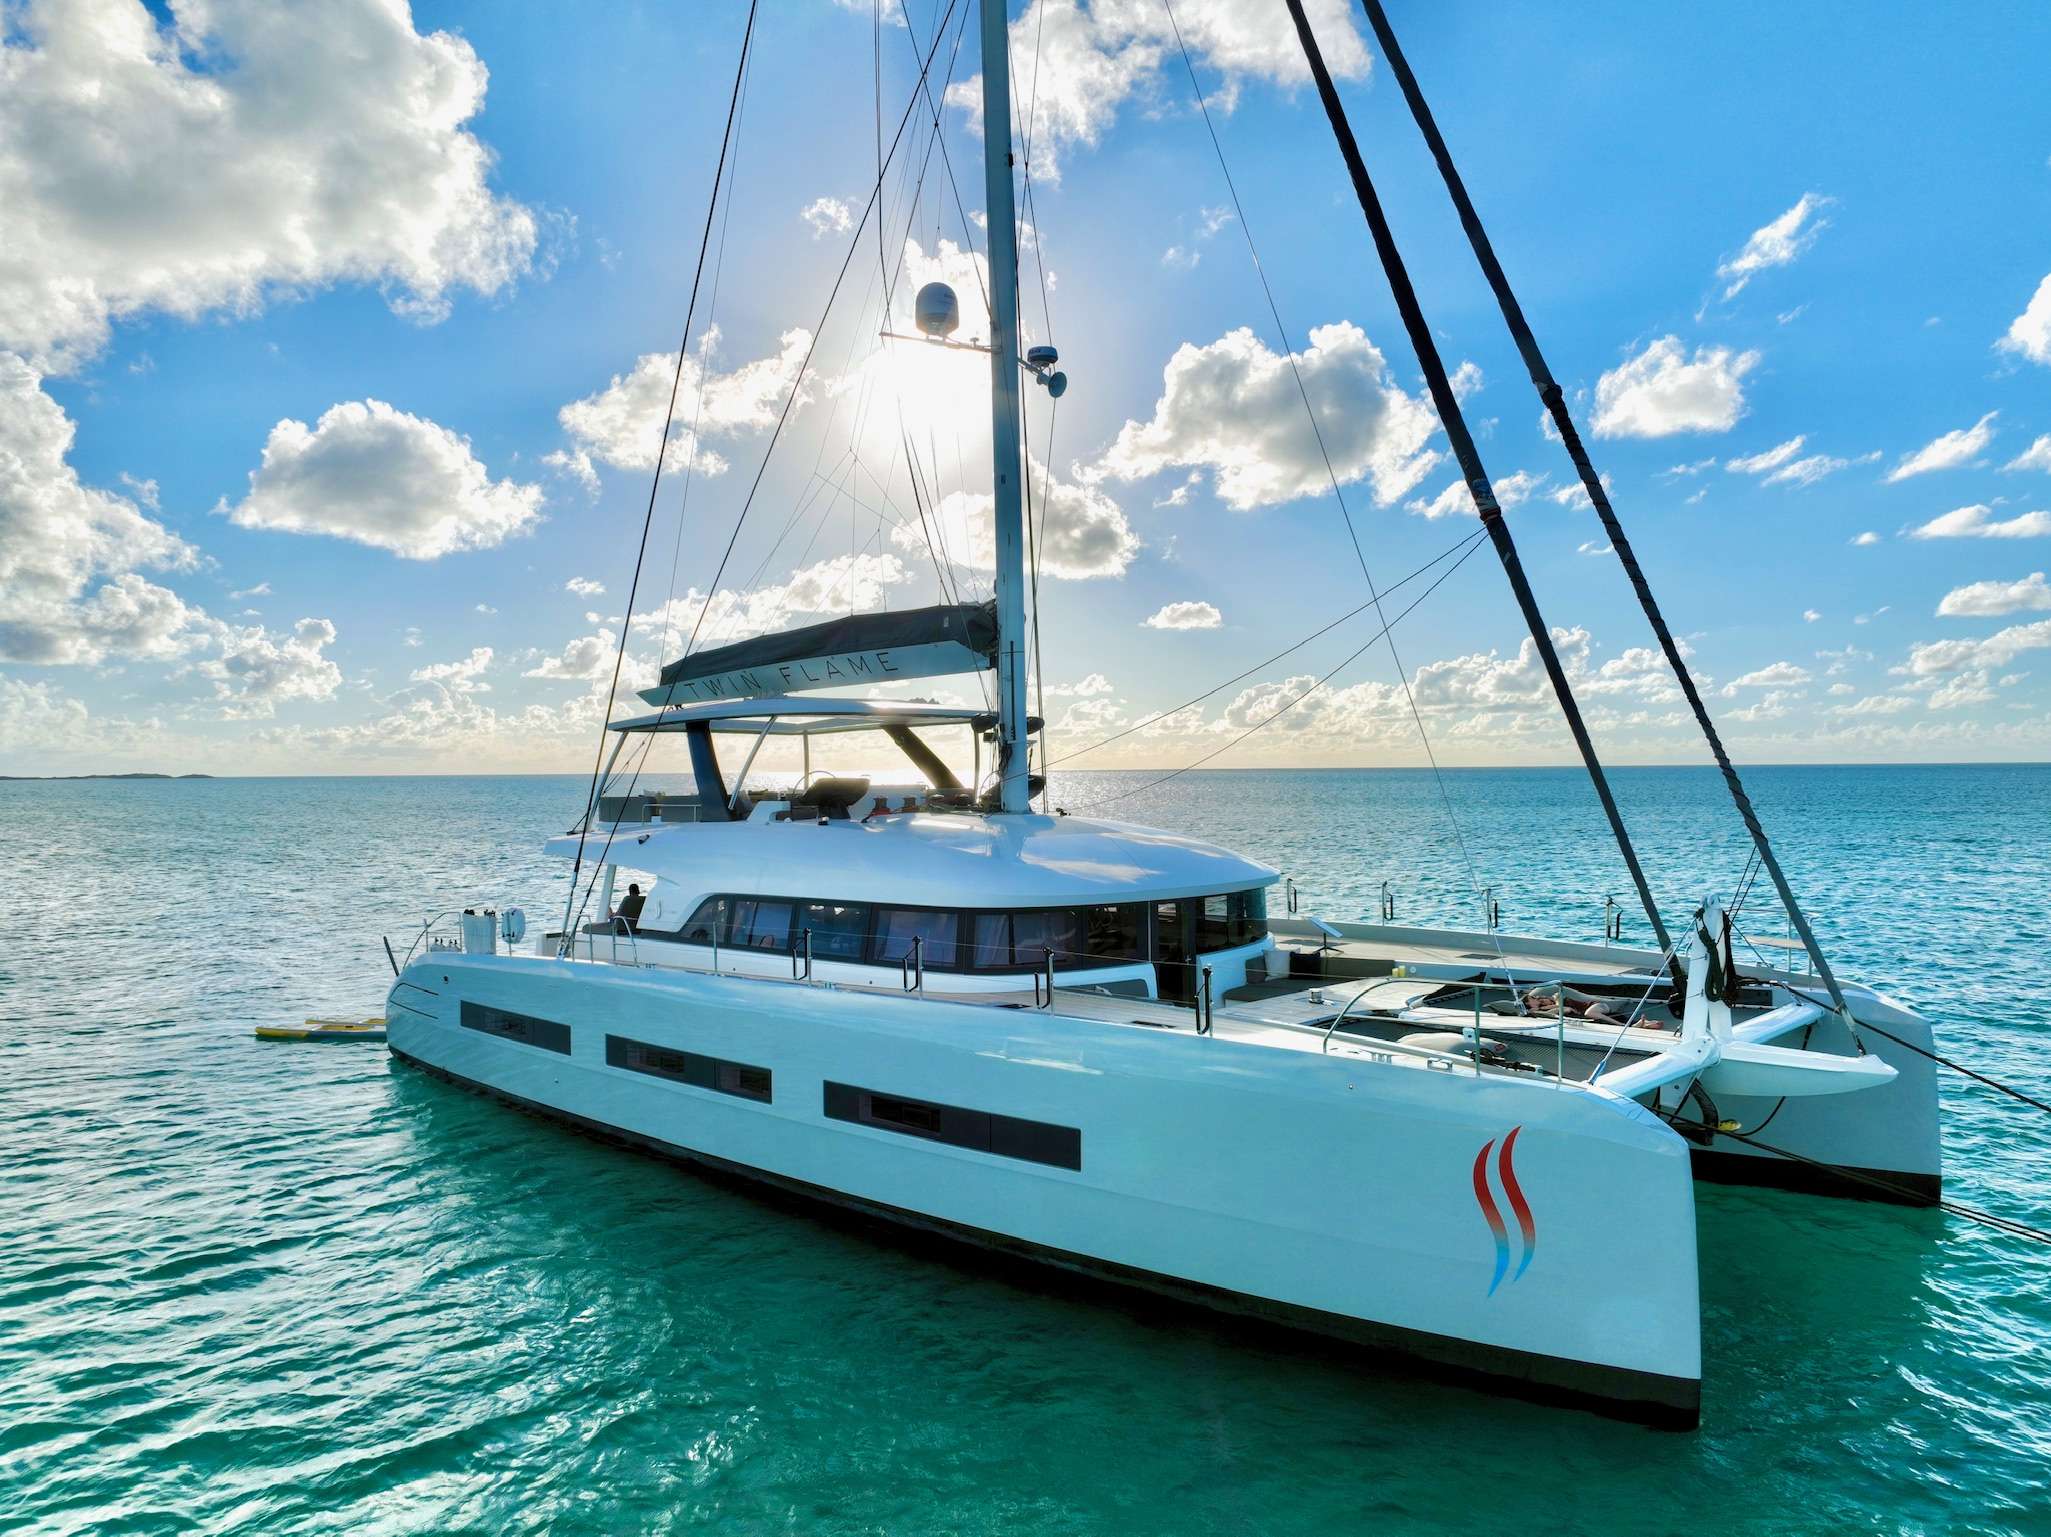 TWIN FLAME 77 Yacht Charter - Ritzy Charters